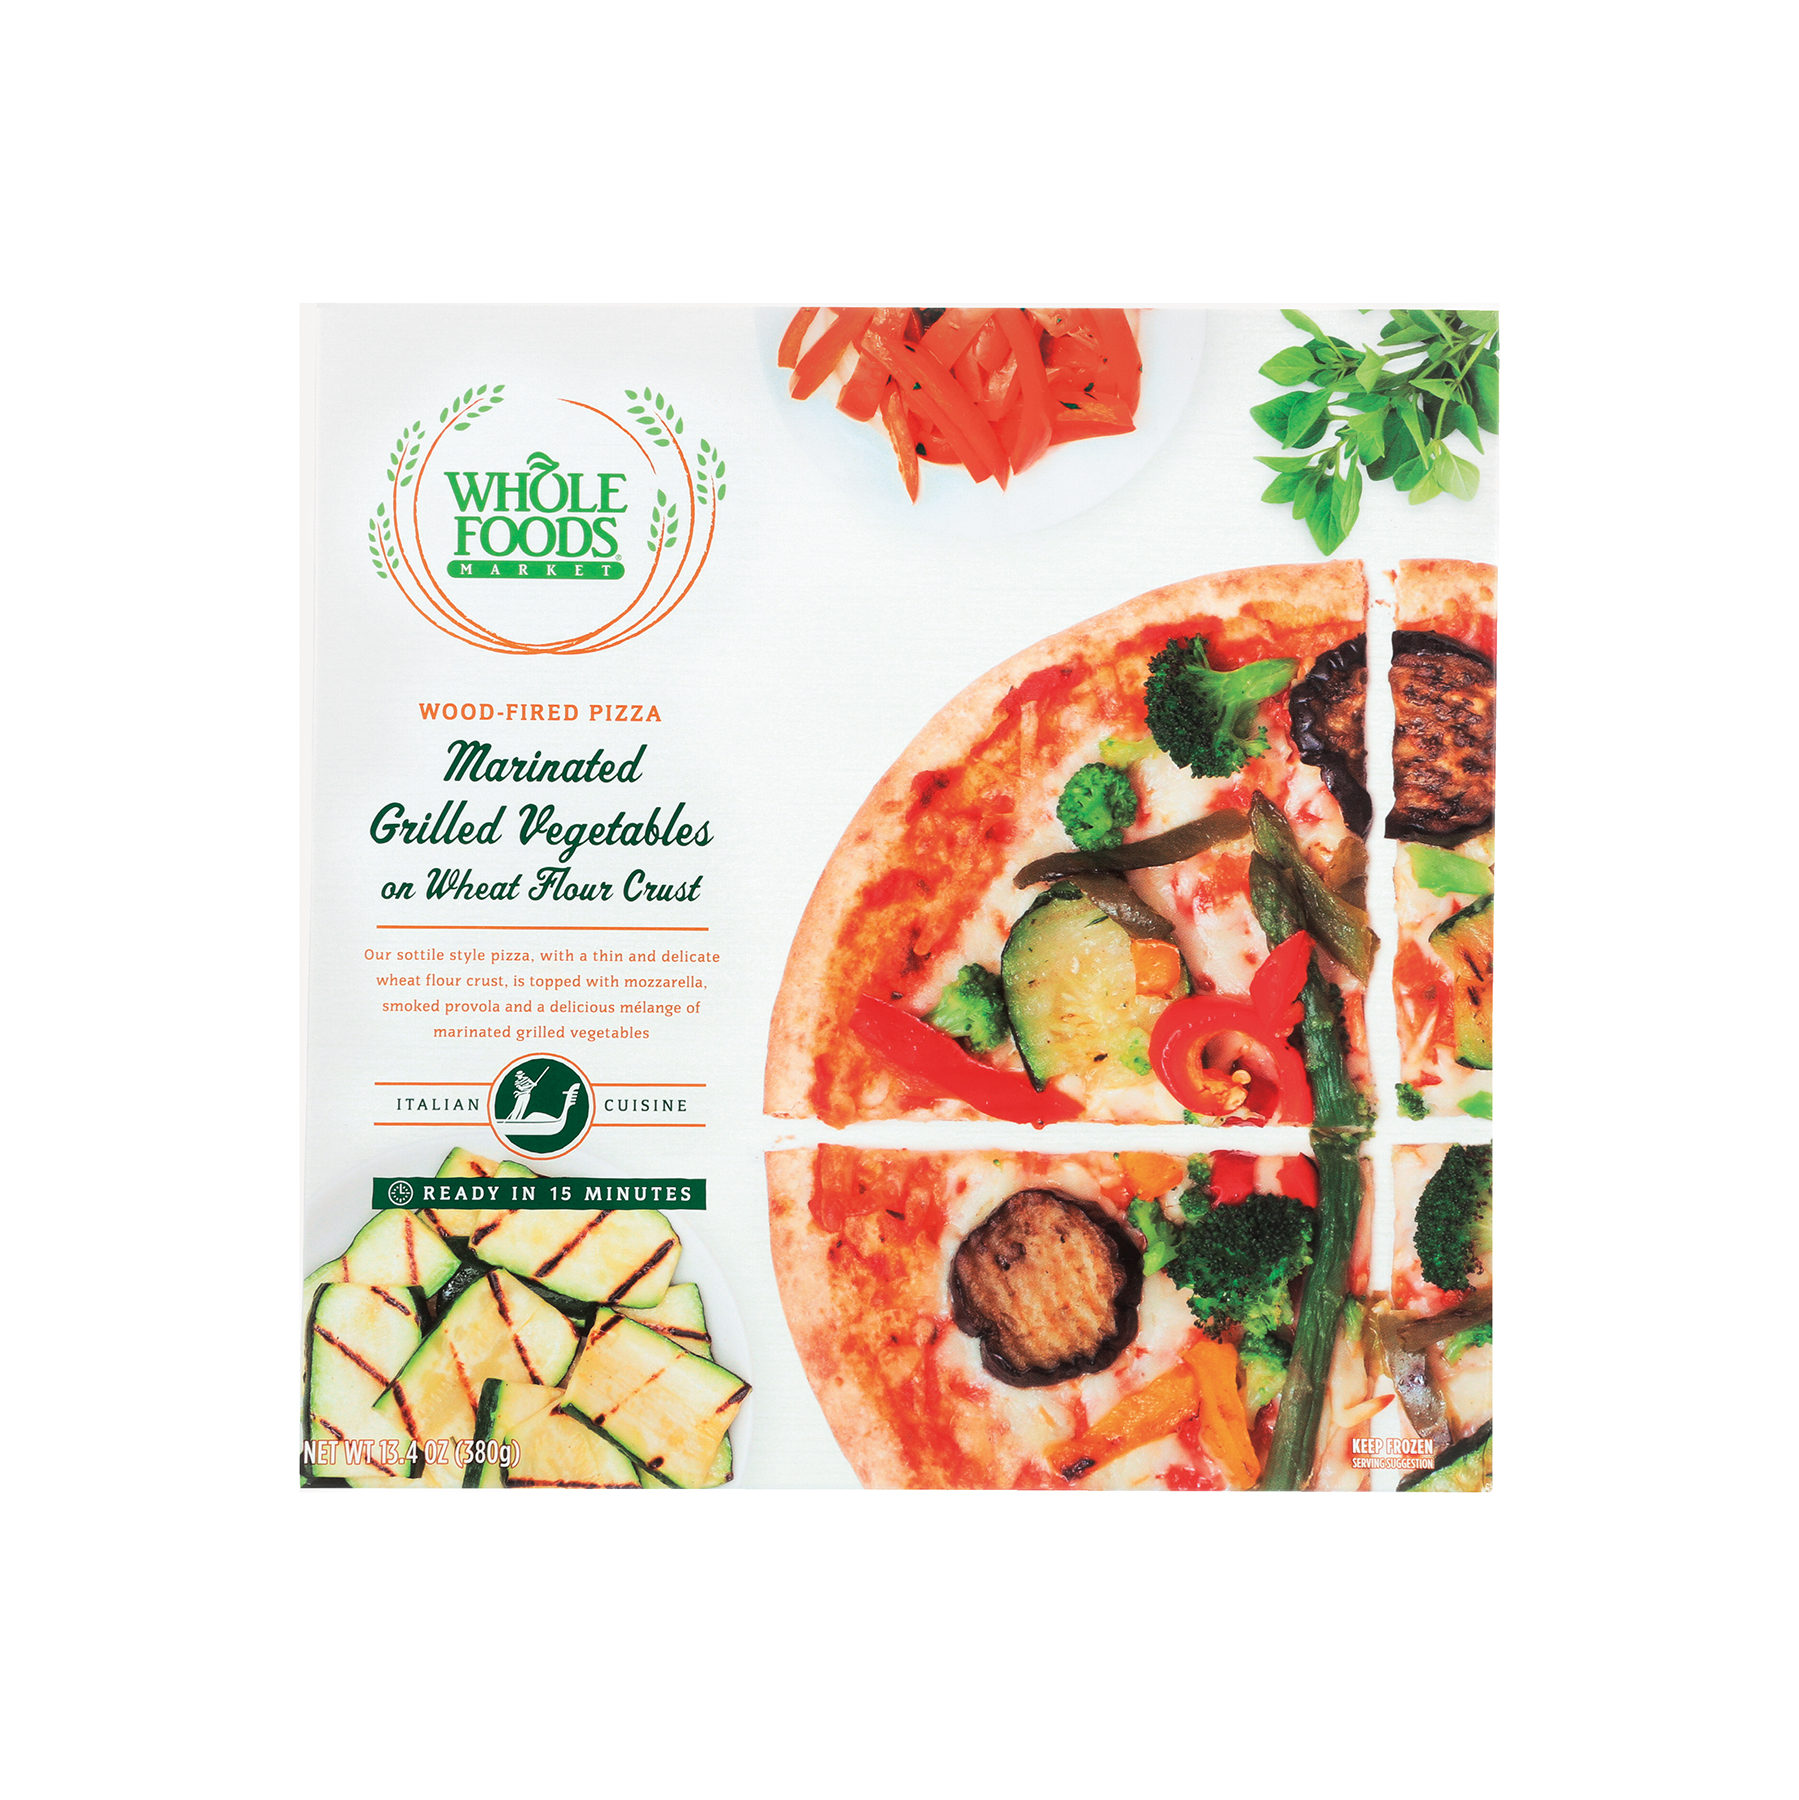 Whole Foods Market Marinated Grilled Vegetables on Wheat Flour Crust pizza